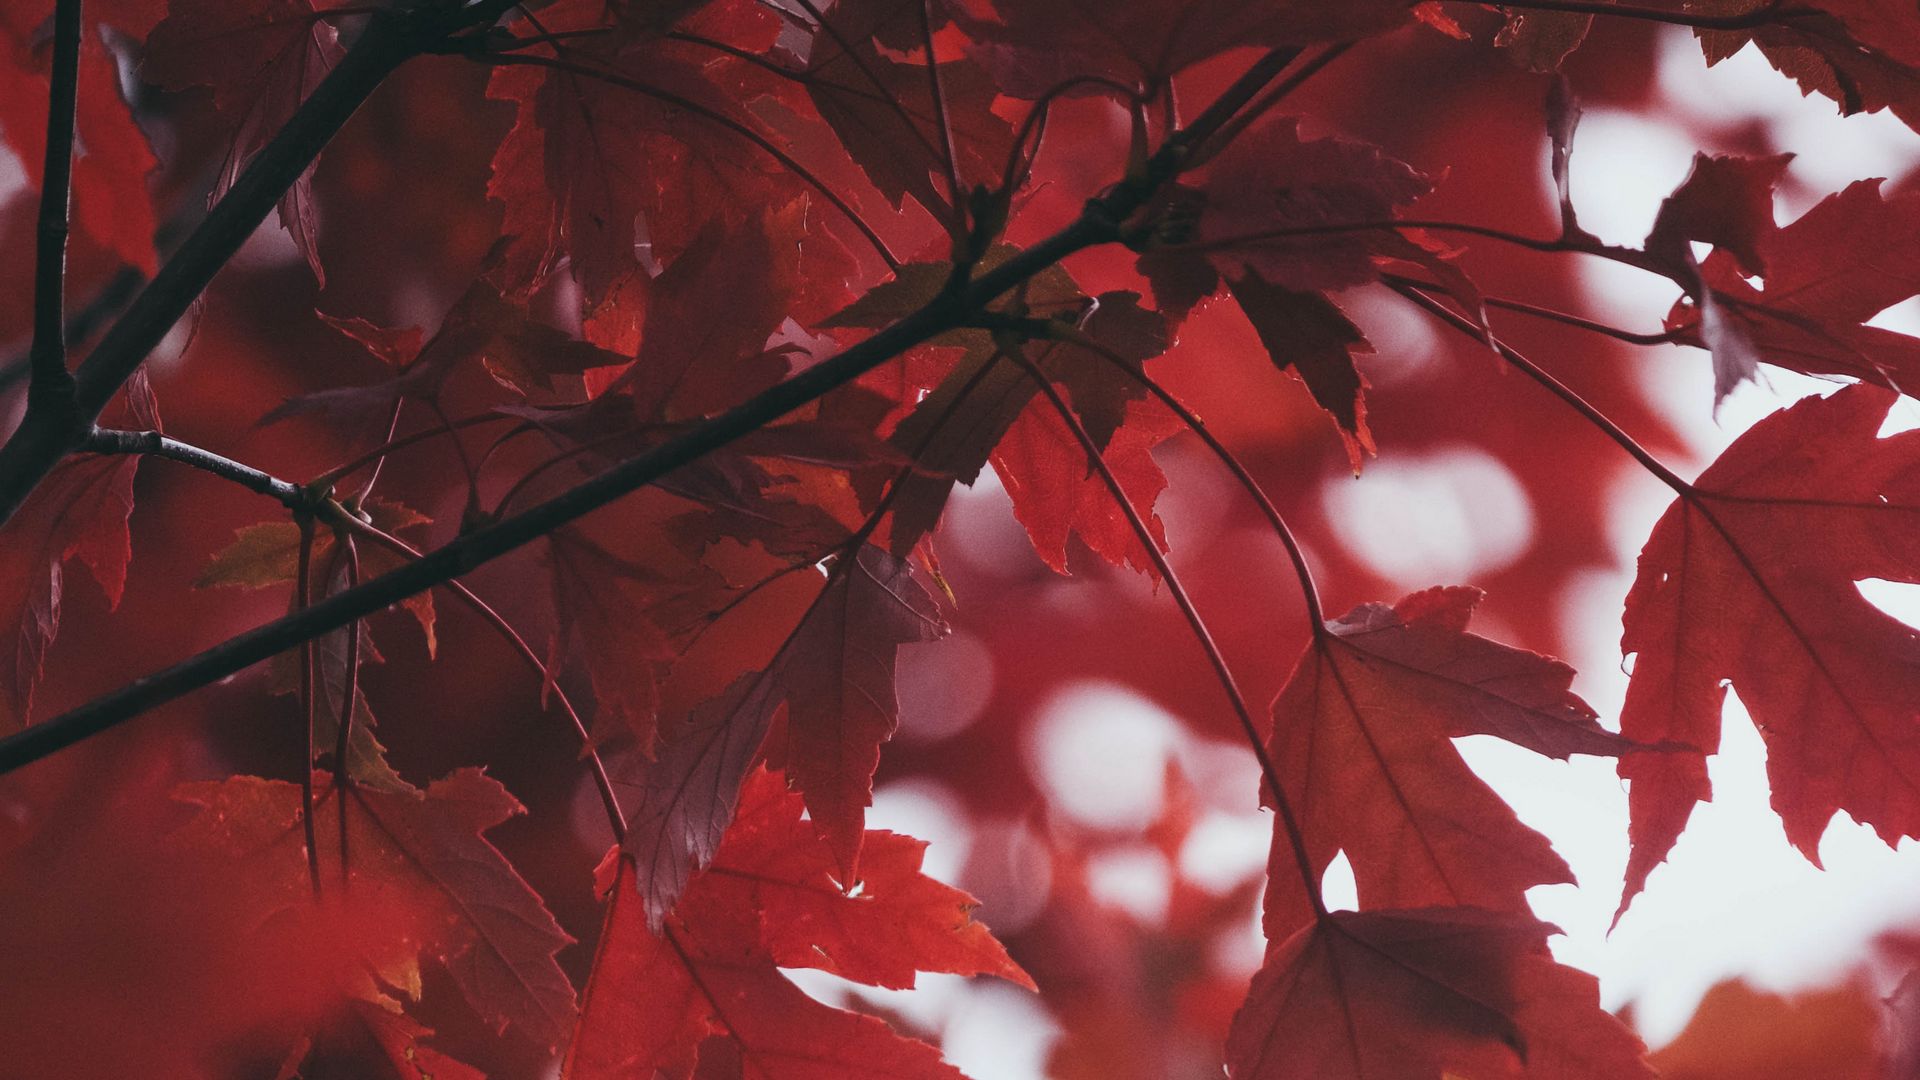 Download wallpaper 1920x1080 leaves, autumn, red, blur full hd, hdtv, fhd, 1080p HD background